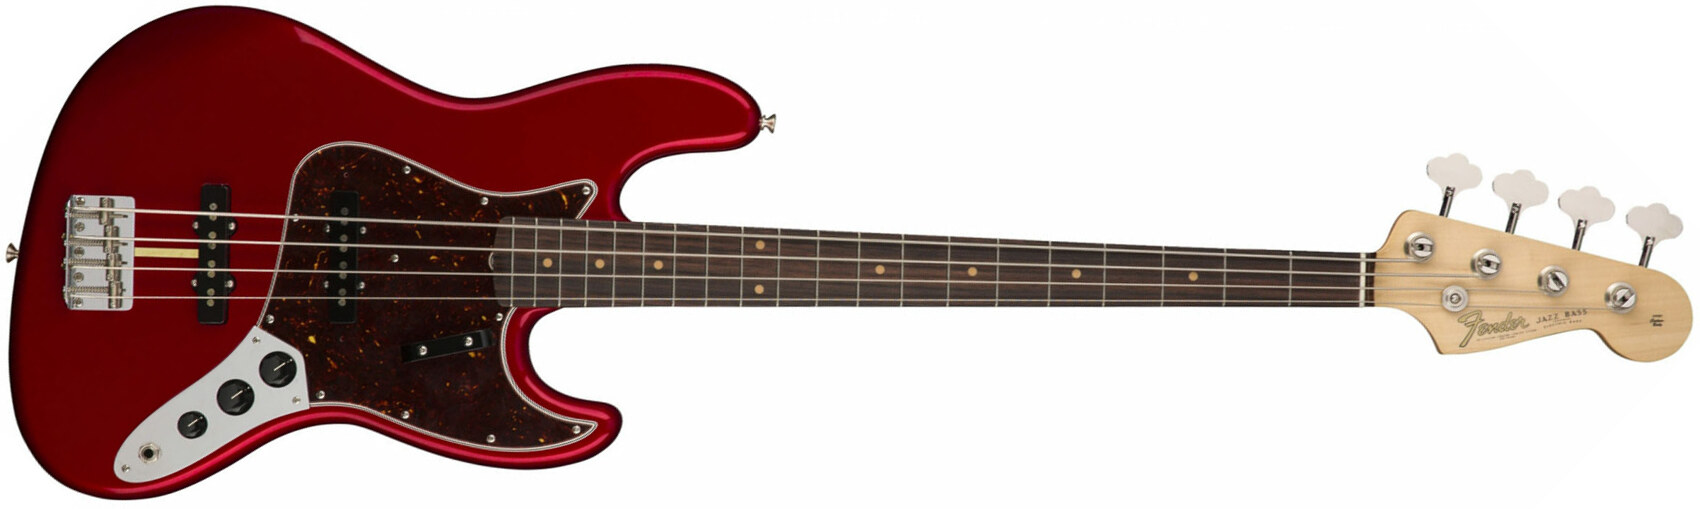 Fender Jazz Bass '60s American Original Usa Rw - Candy Apple Red - Solid body electric bass - Main picture